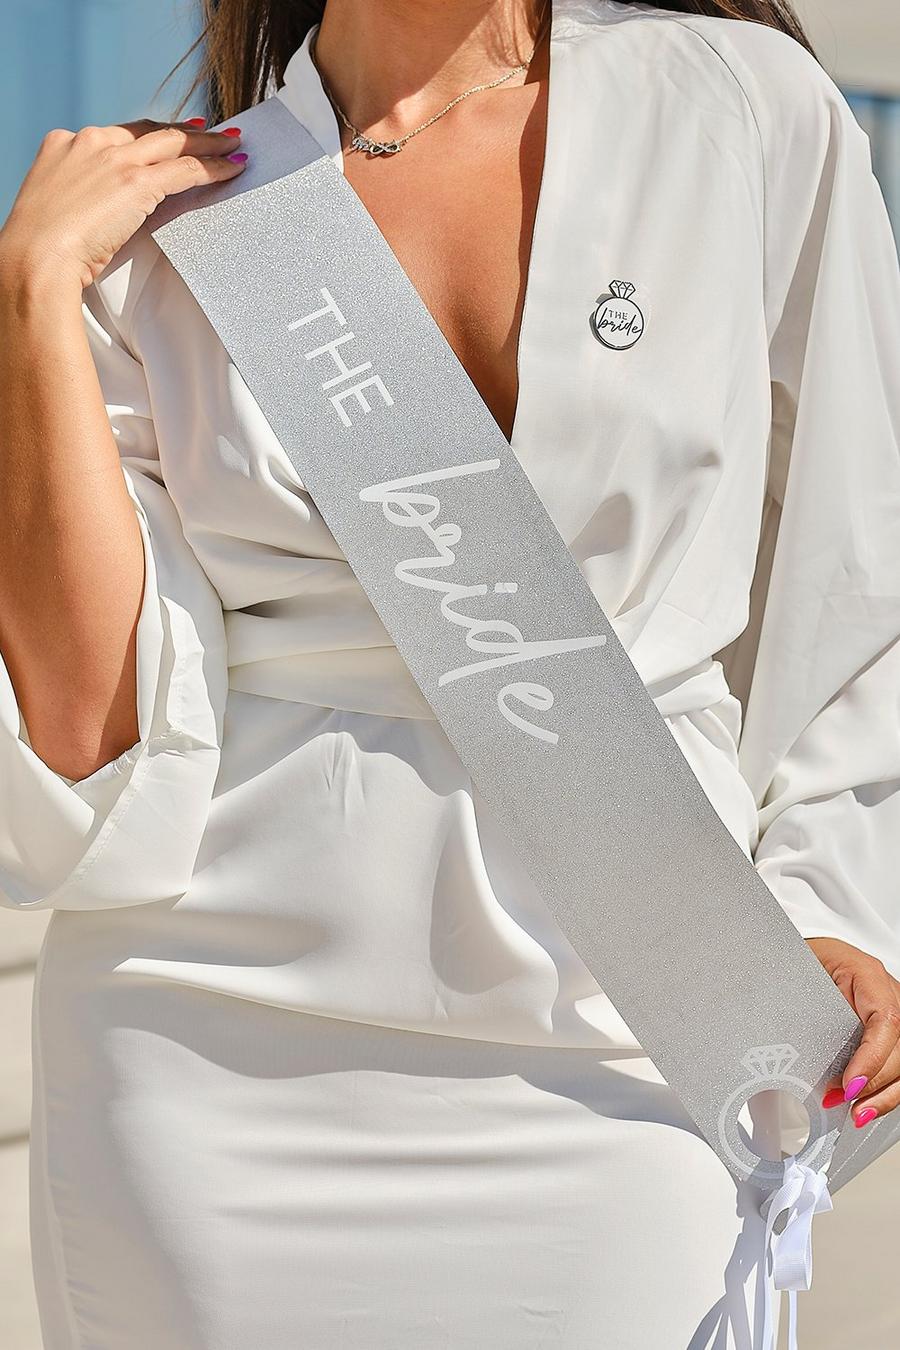 Silver Ginger Ray Glitter Bride To Be Sash 